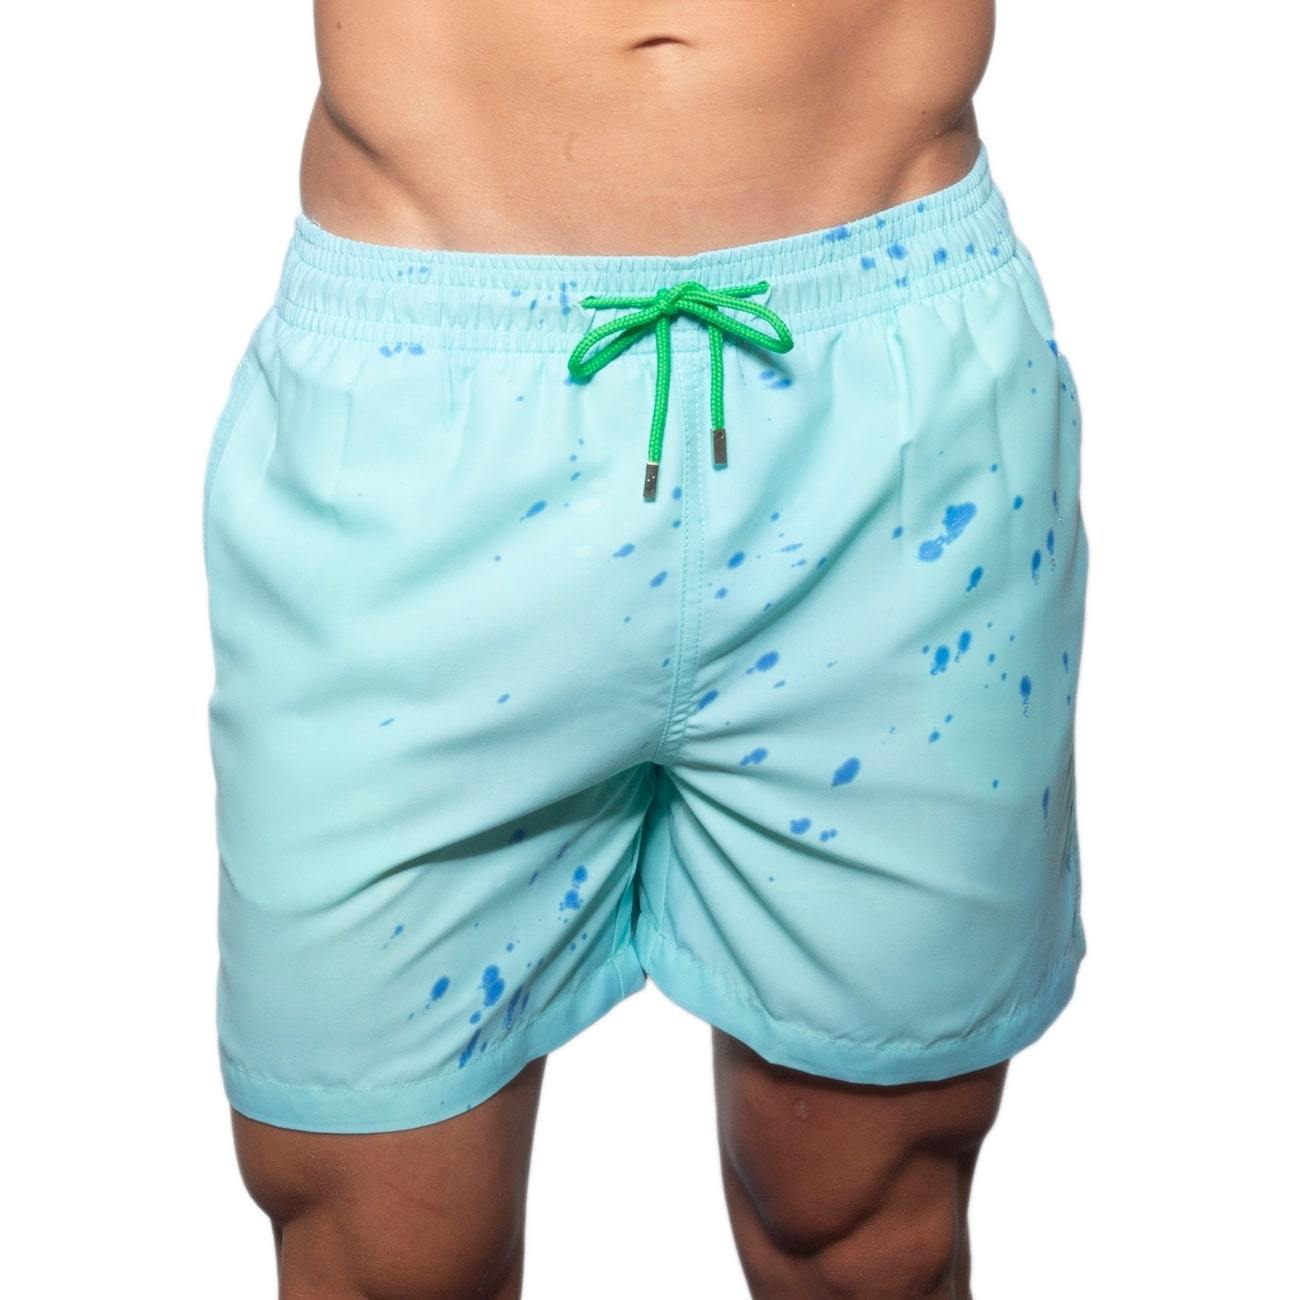 MAN SWITCH COLOR CHANGING SWIM TRUNKS